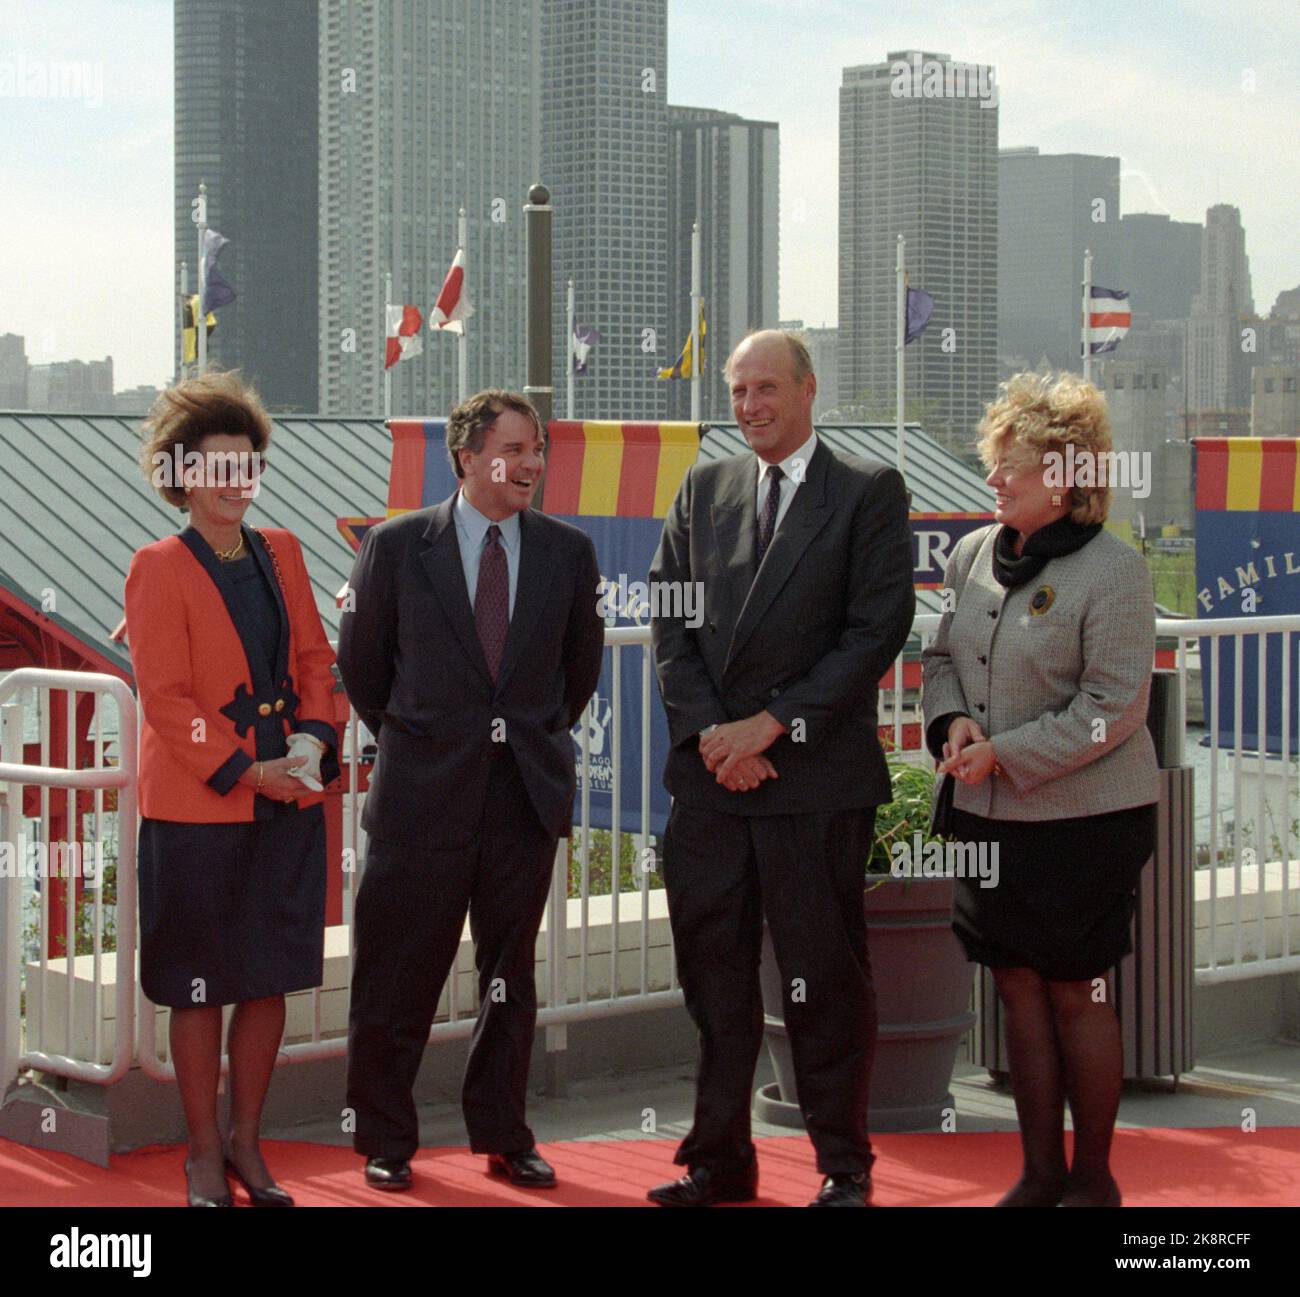 Chicago, USA 199510. The royal couple's journey in the United States. King Harald and Queen Sonja on an official visit to the United States. Image: Chicago. The royal couple meets by mayor Richard M. Daley and wife Margareth on Navy Pier, - photographed together. Chicago skyline in the background. Photo: Terje Bendiksby Stock Photo